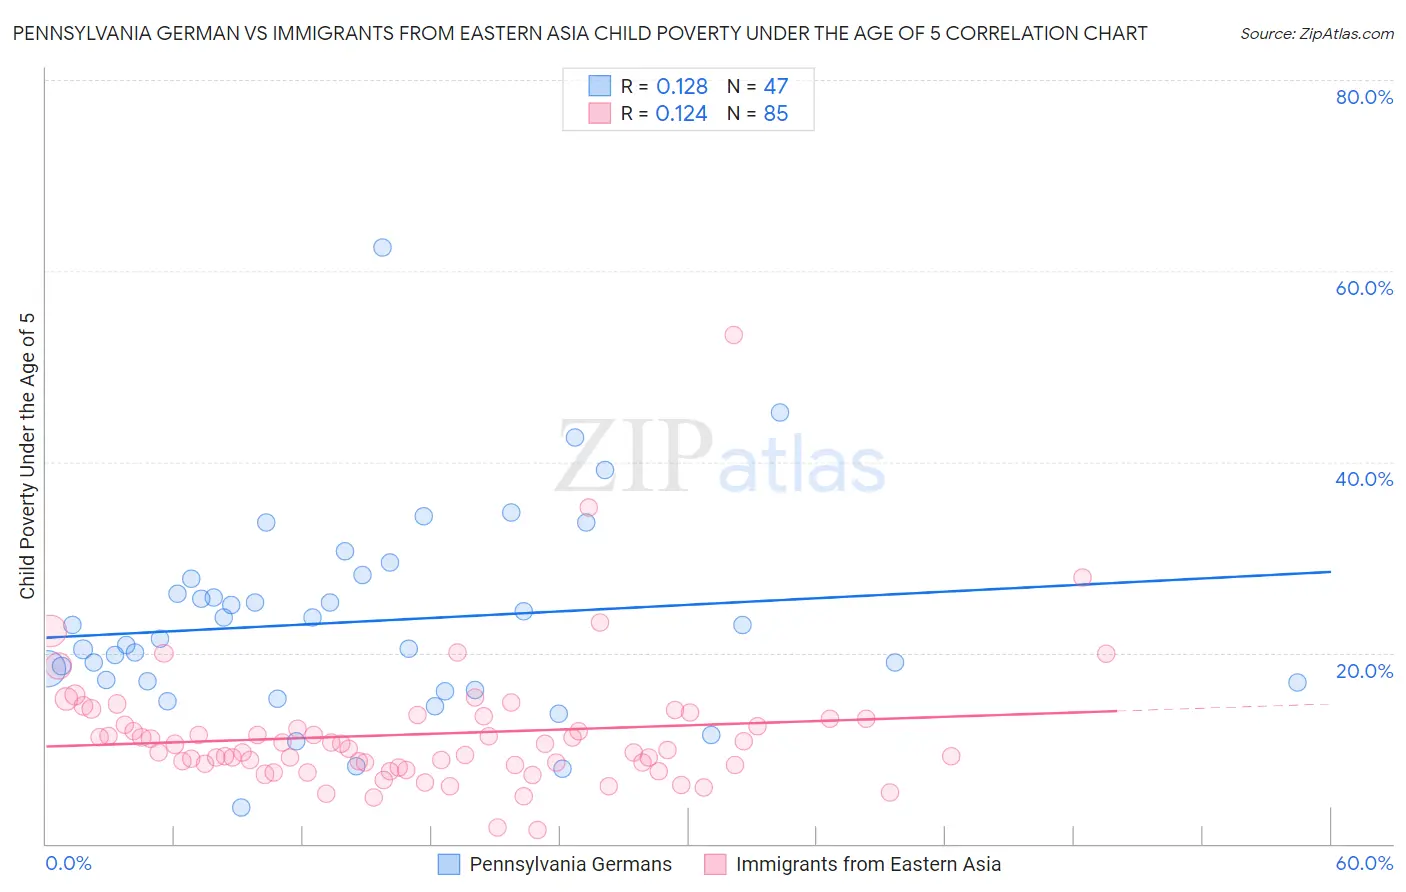 Pennsylvania German vs Immigrants from Eastern Asia Child Poverty Under the Age of 5